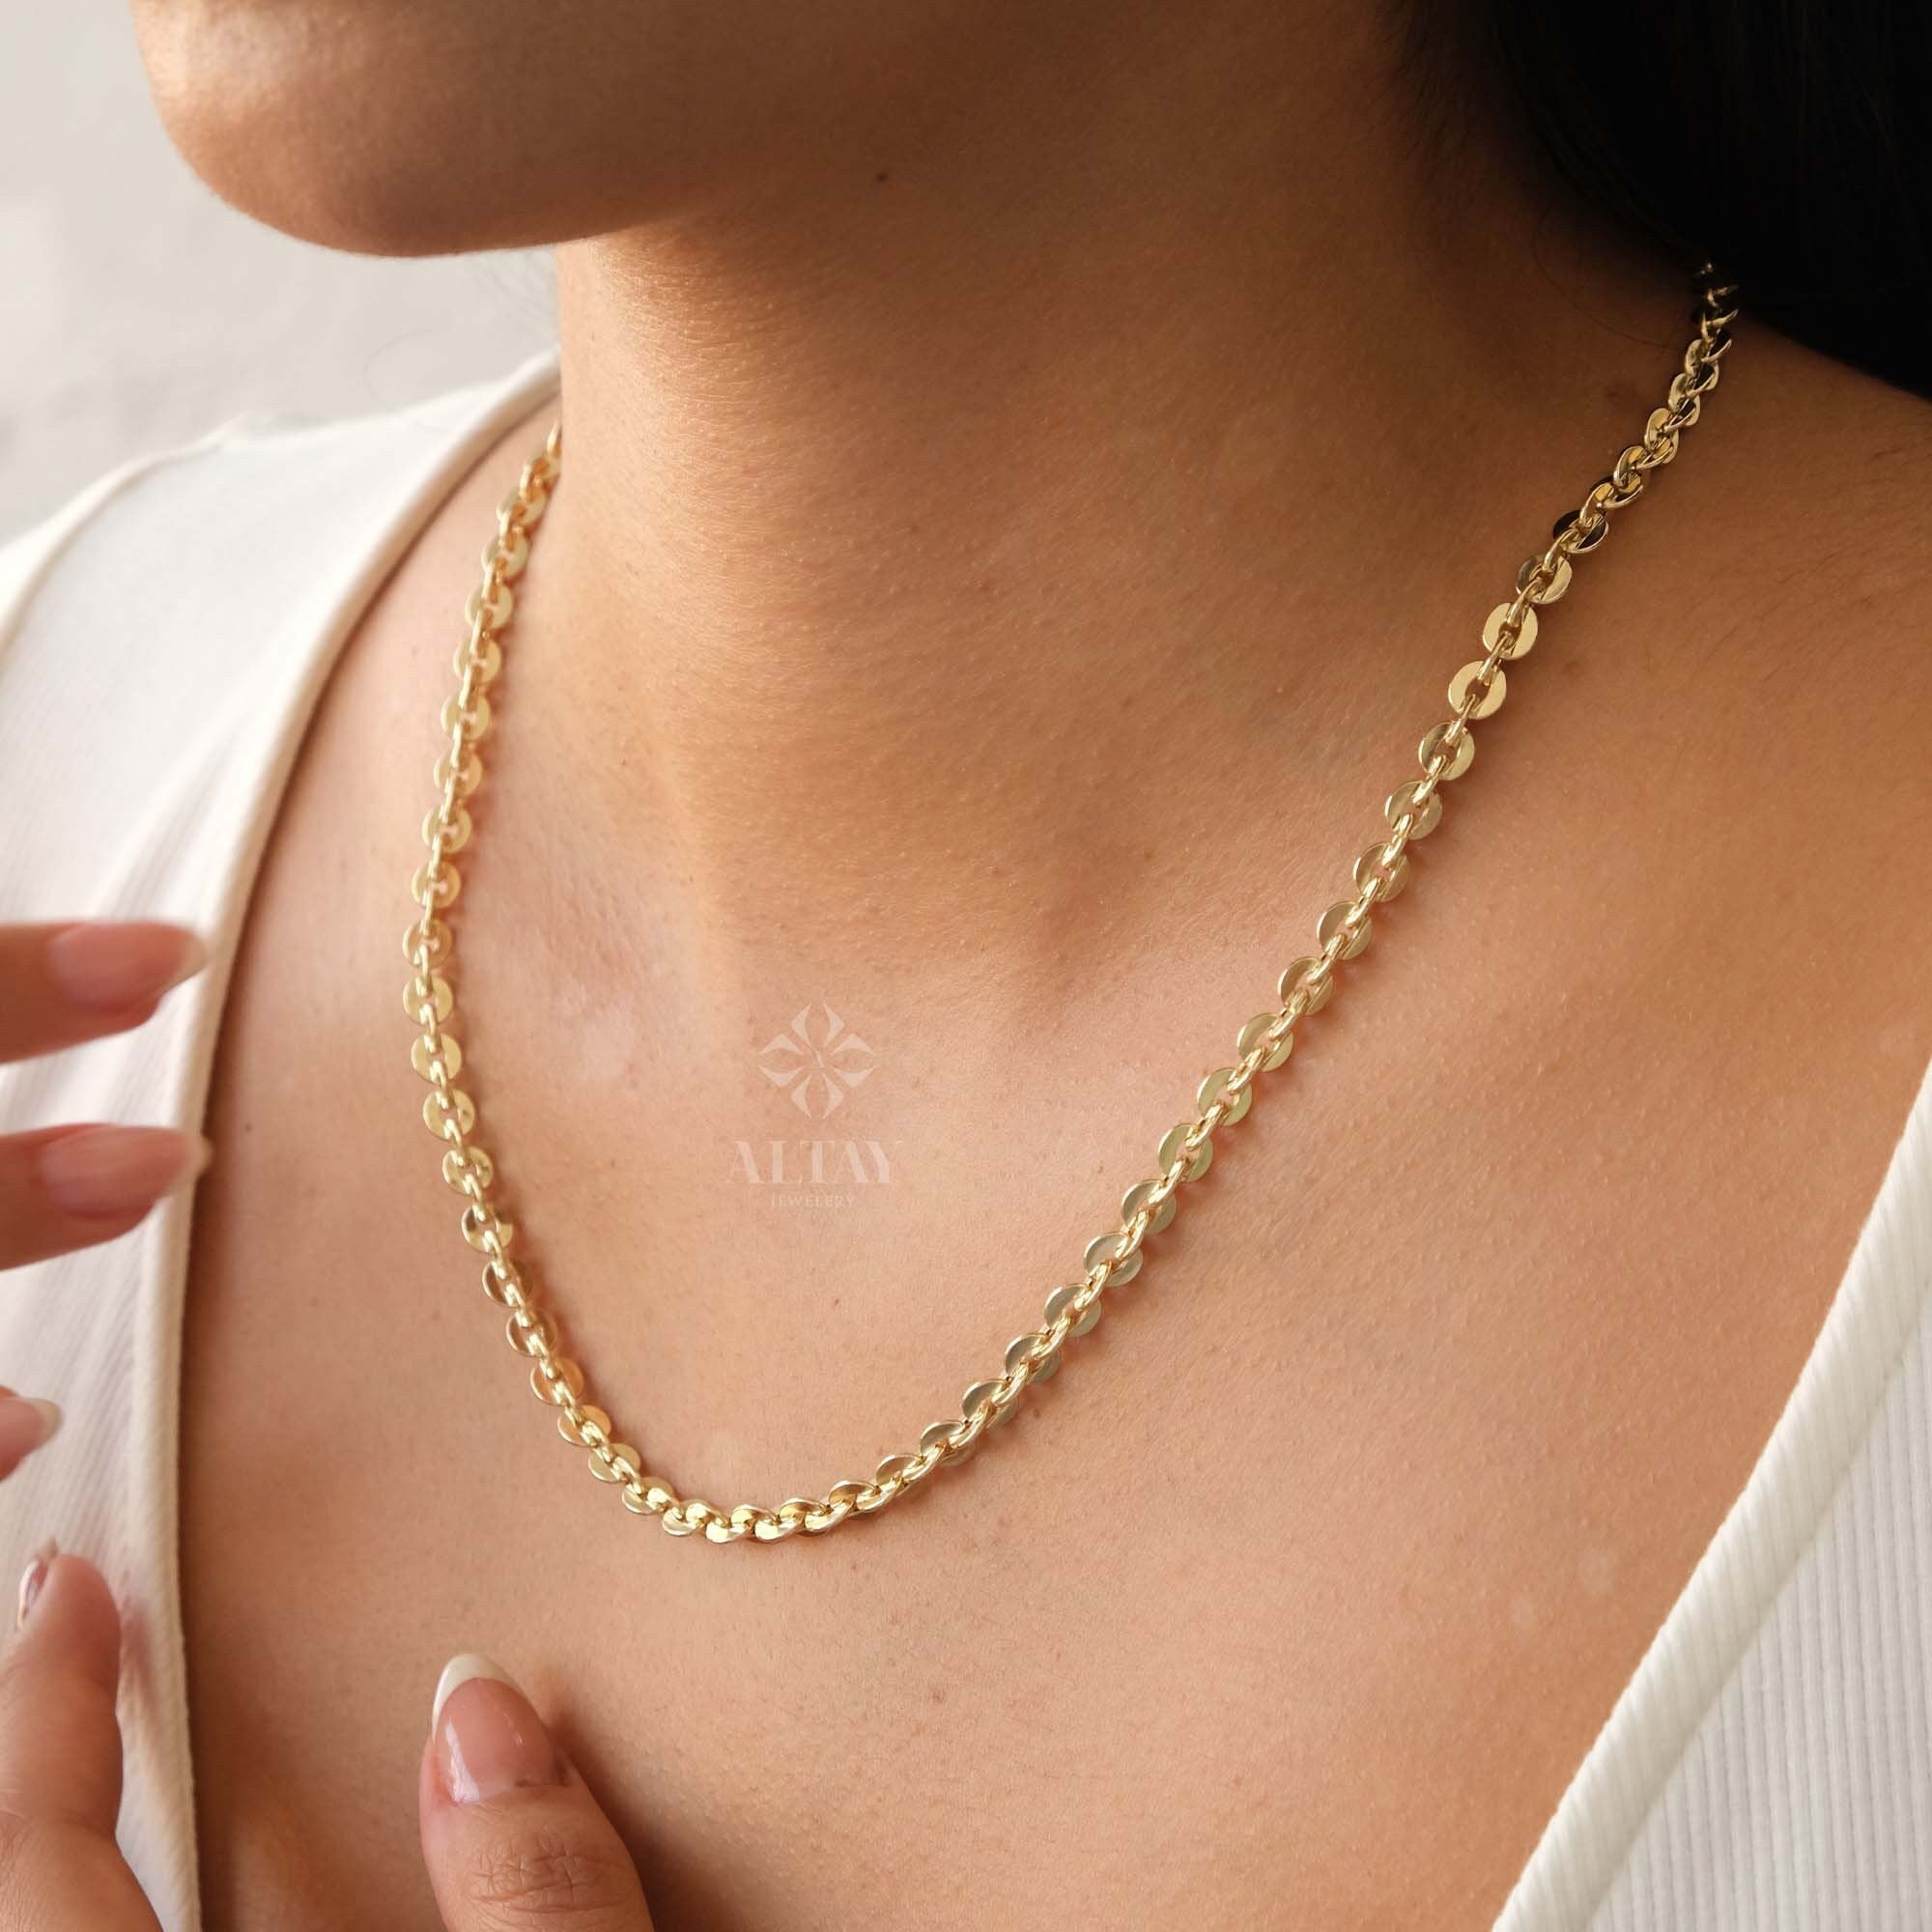 14K Gold Chain Necklace, Rolo Chain Choker, Oval Links Necklace, Chunky Chain Necklace, Cable Chain Necklace, Women Layering Necklace